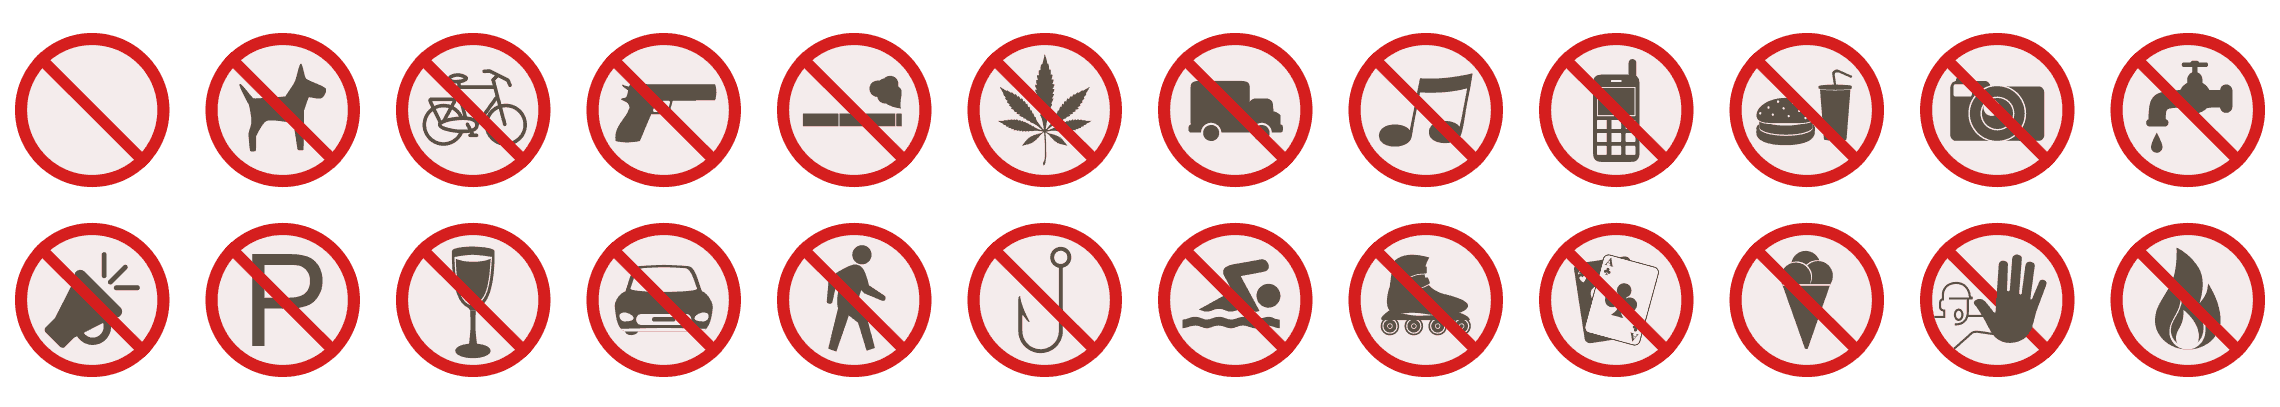 warning-signs-flat-icons-vol-1-preview